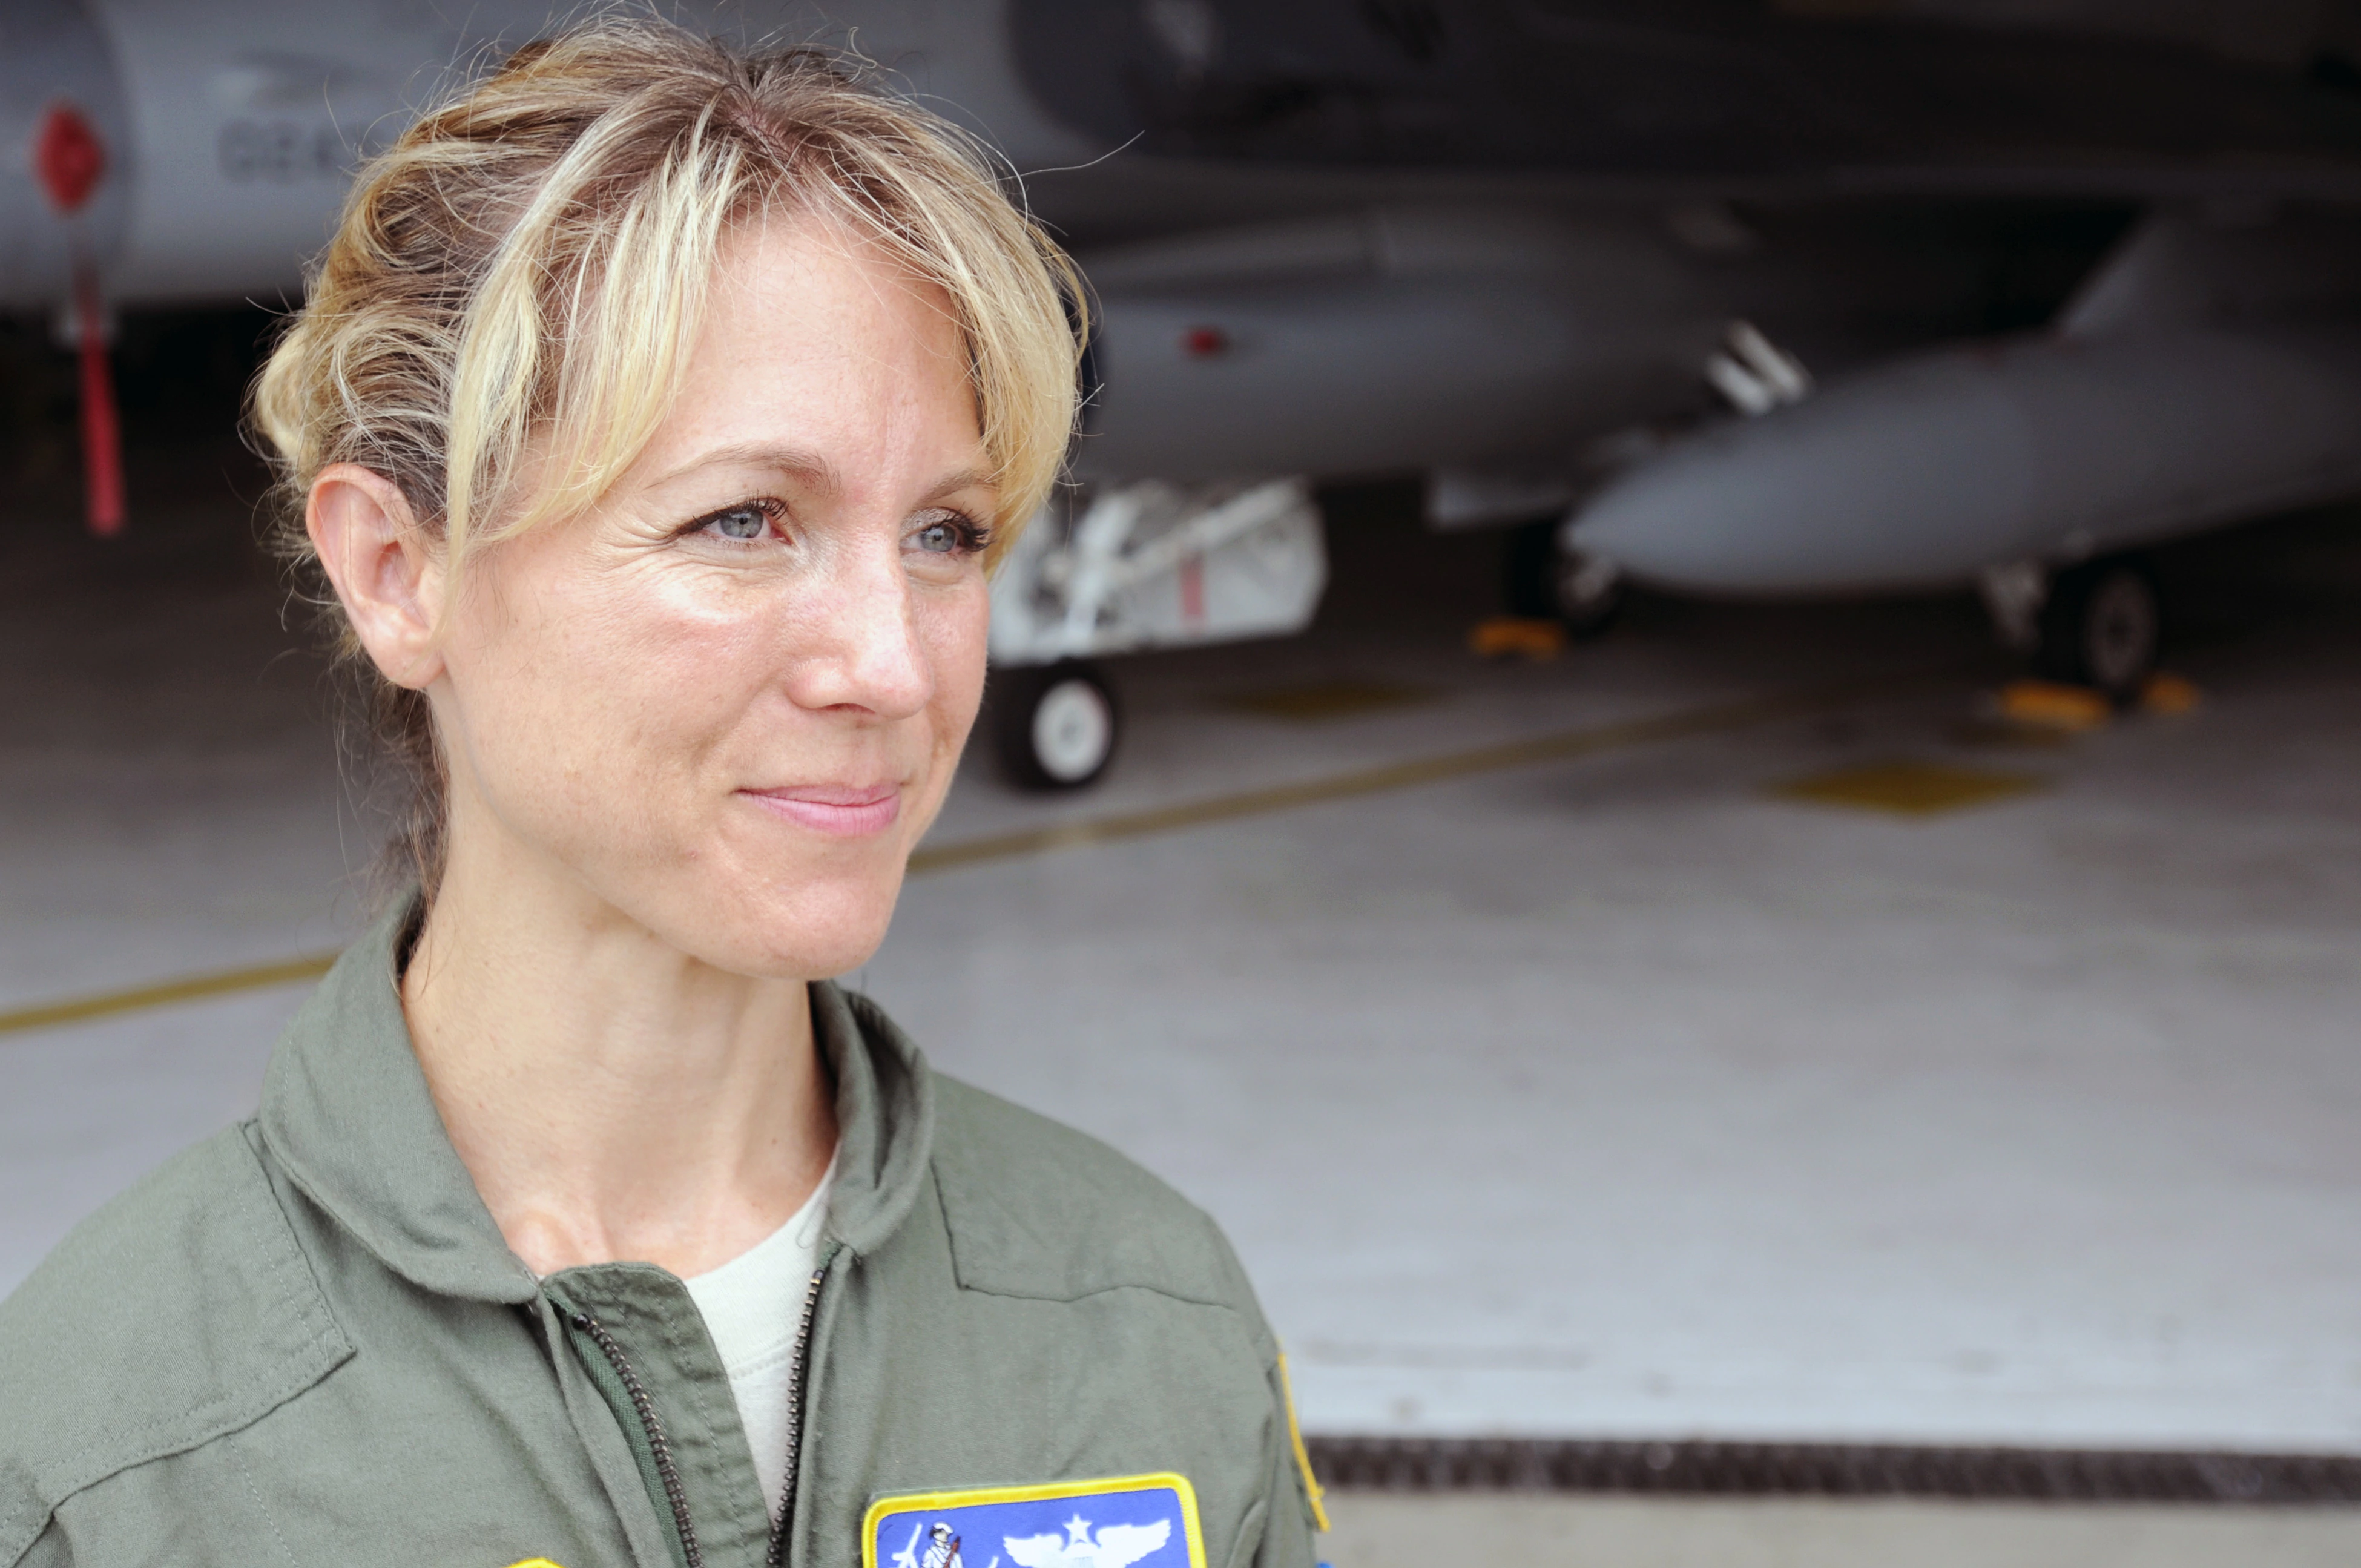 Heather Penney F16 pilot was ready to give her life on Sept 11 The